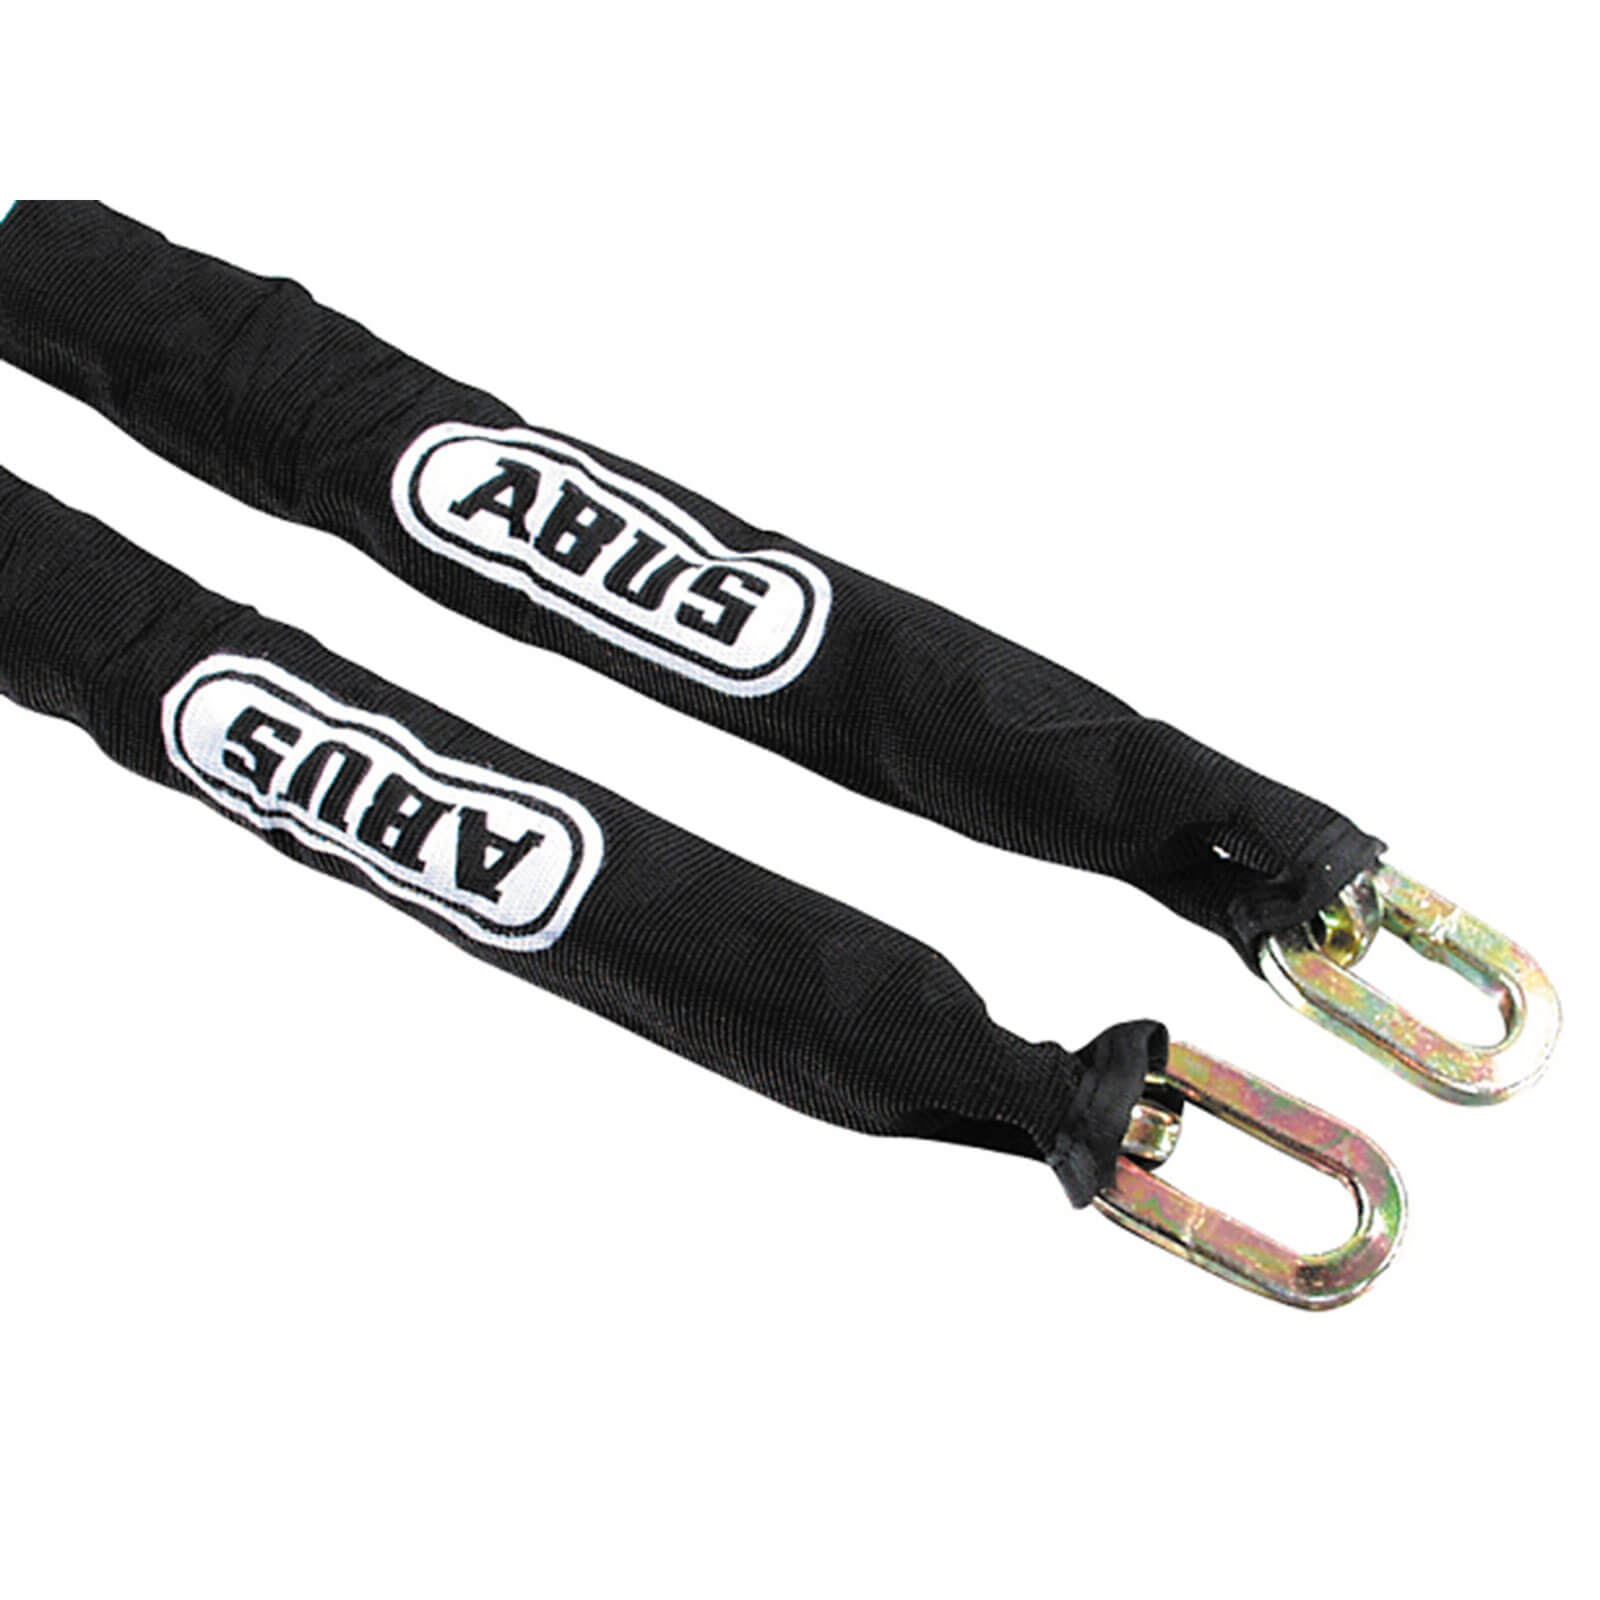 Image of Abus 10Ks 1100mm Hardened Security Chain 10mm Link Diameter